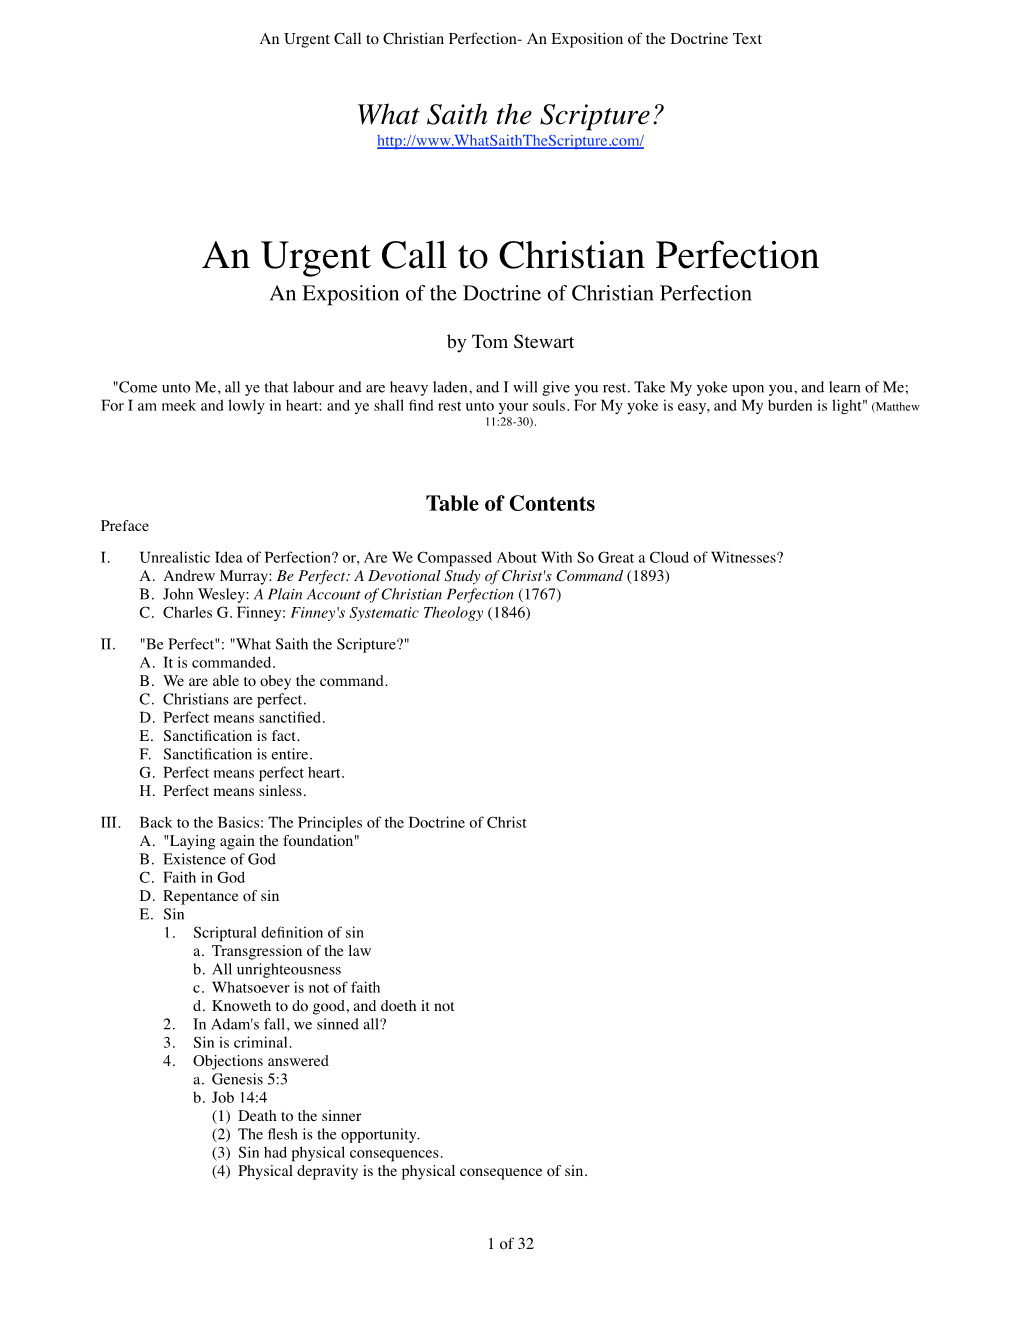 An Urgent Call to Christian Perfection- an Exposition of the Doctrine Text